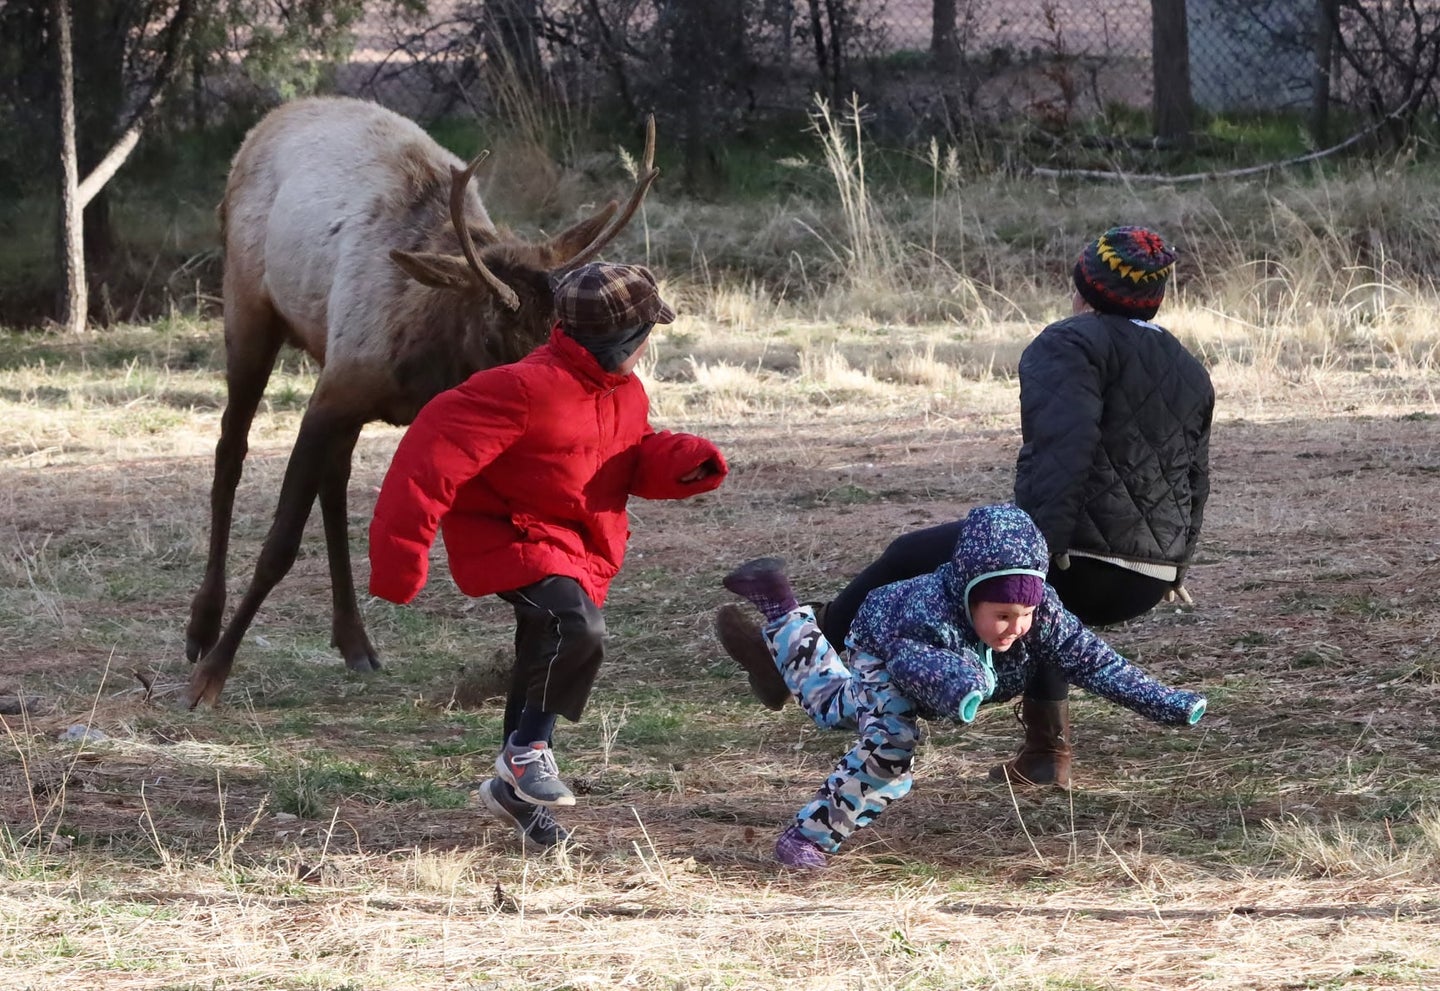 spike elk charges into family sending kid and mother tumbling